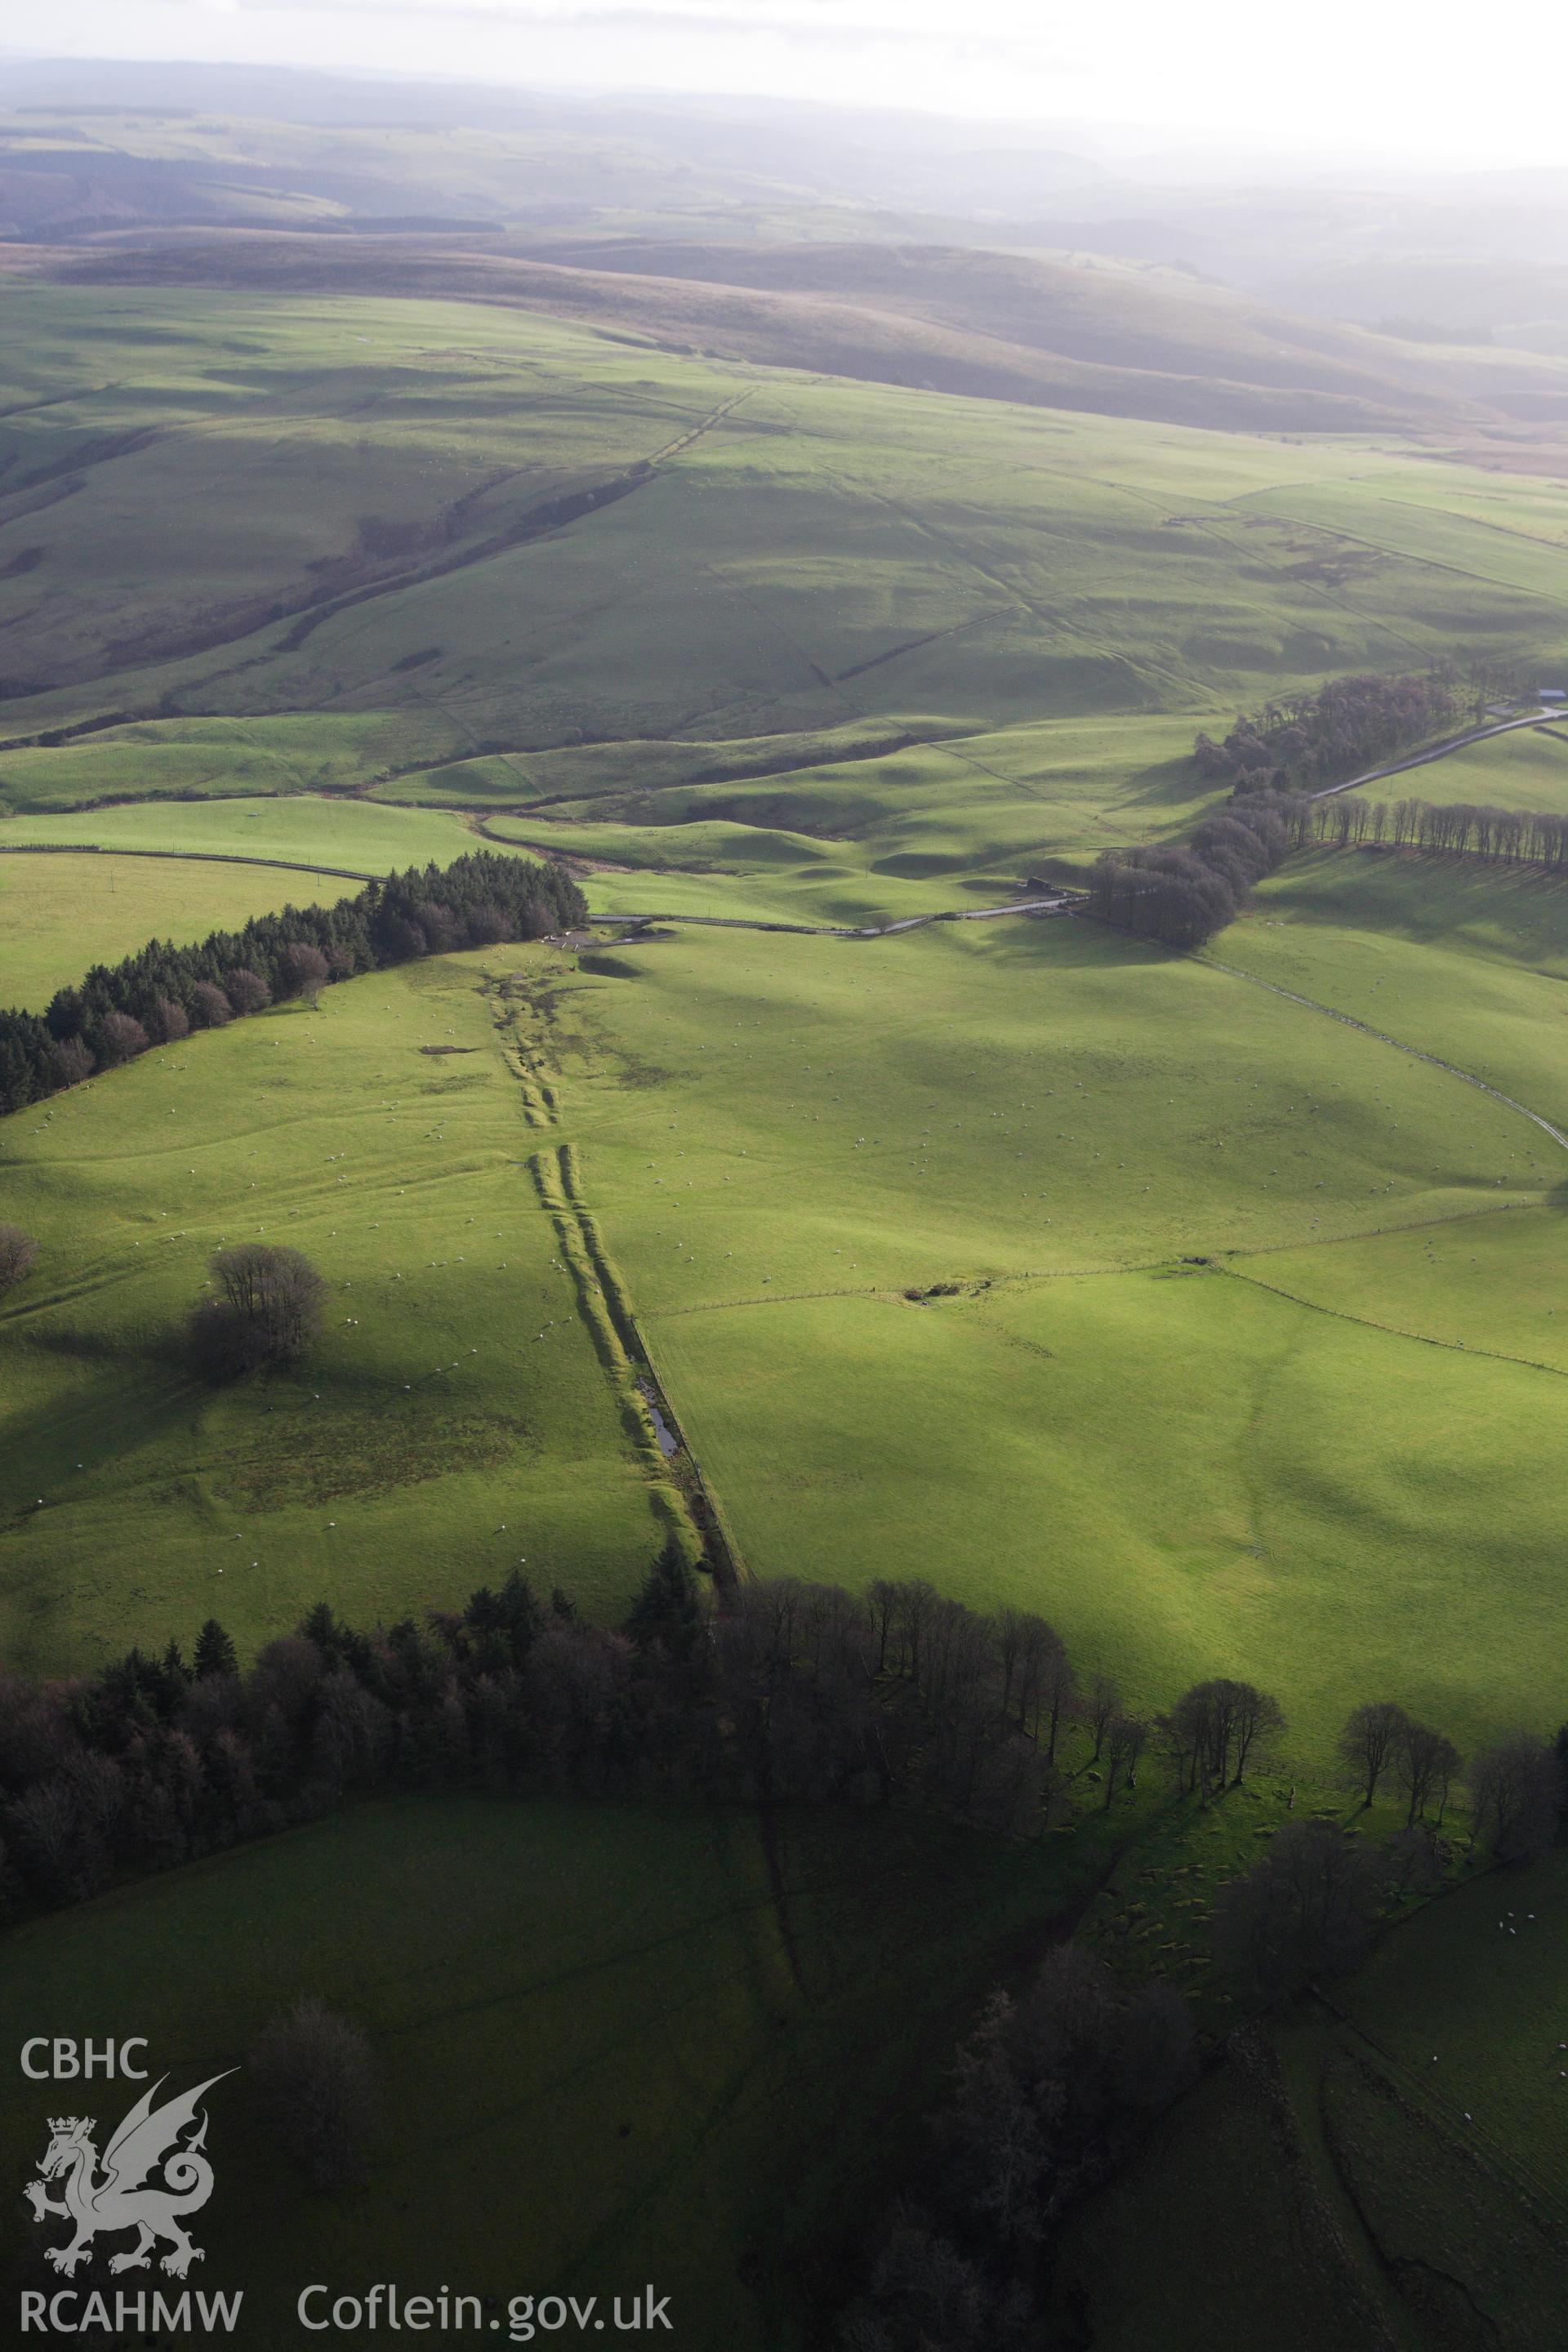 RCAHMW colour oblique aerial photograph of Crugyn Bank Dyke. Taken on 10 December 2009 by Toby Driver